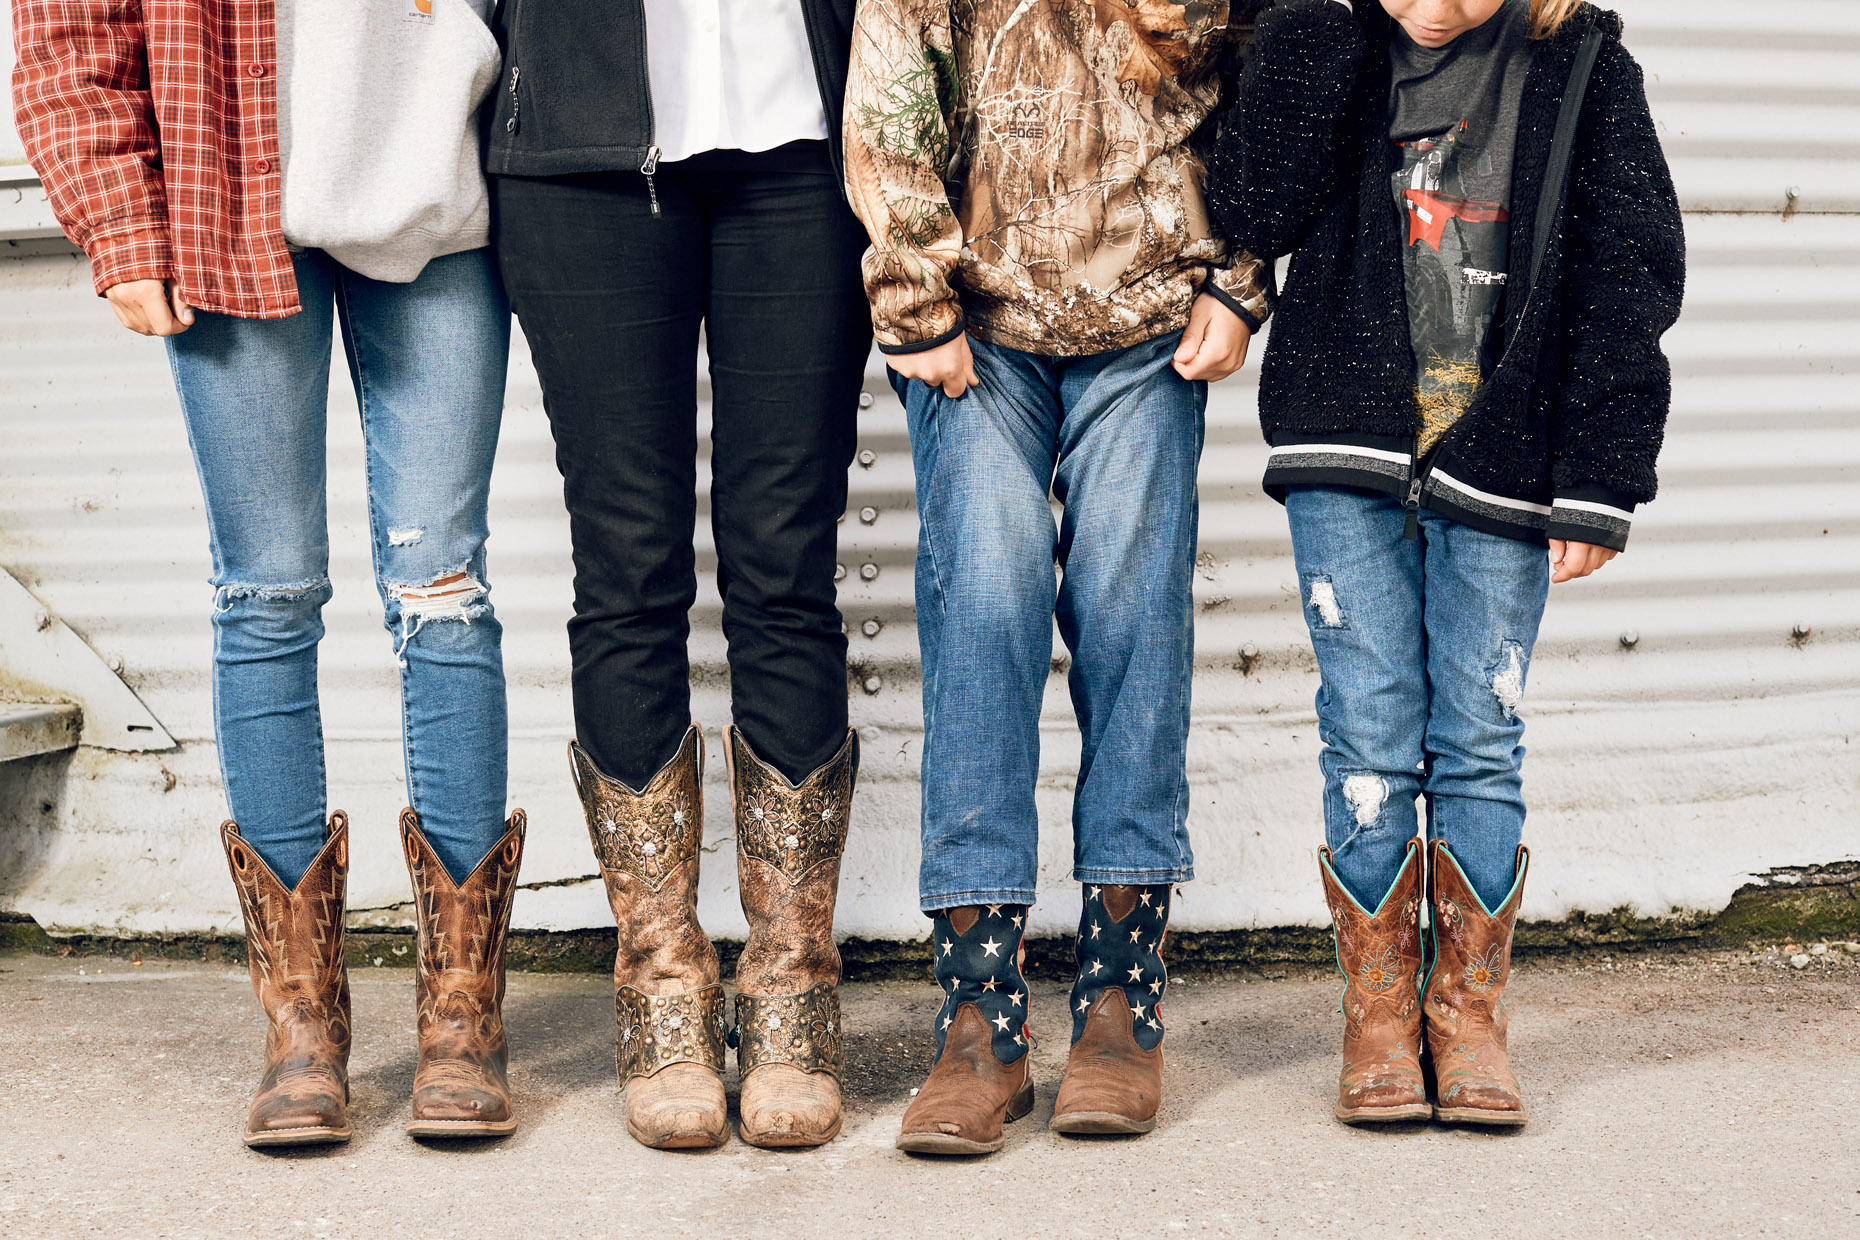 Family wearing cowboy boots | lifestyle photography by Saverio Truglia